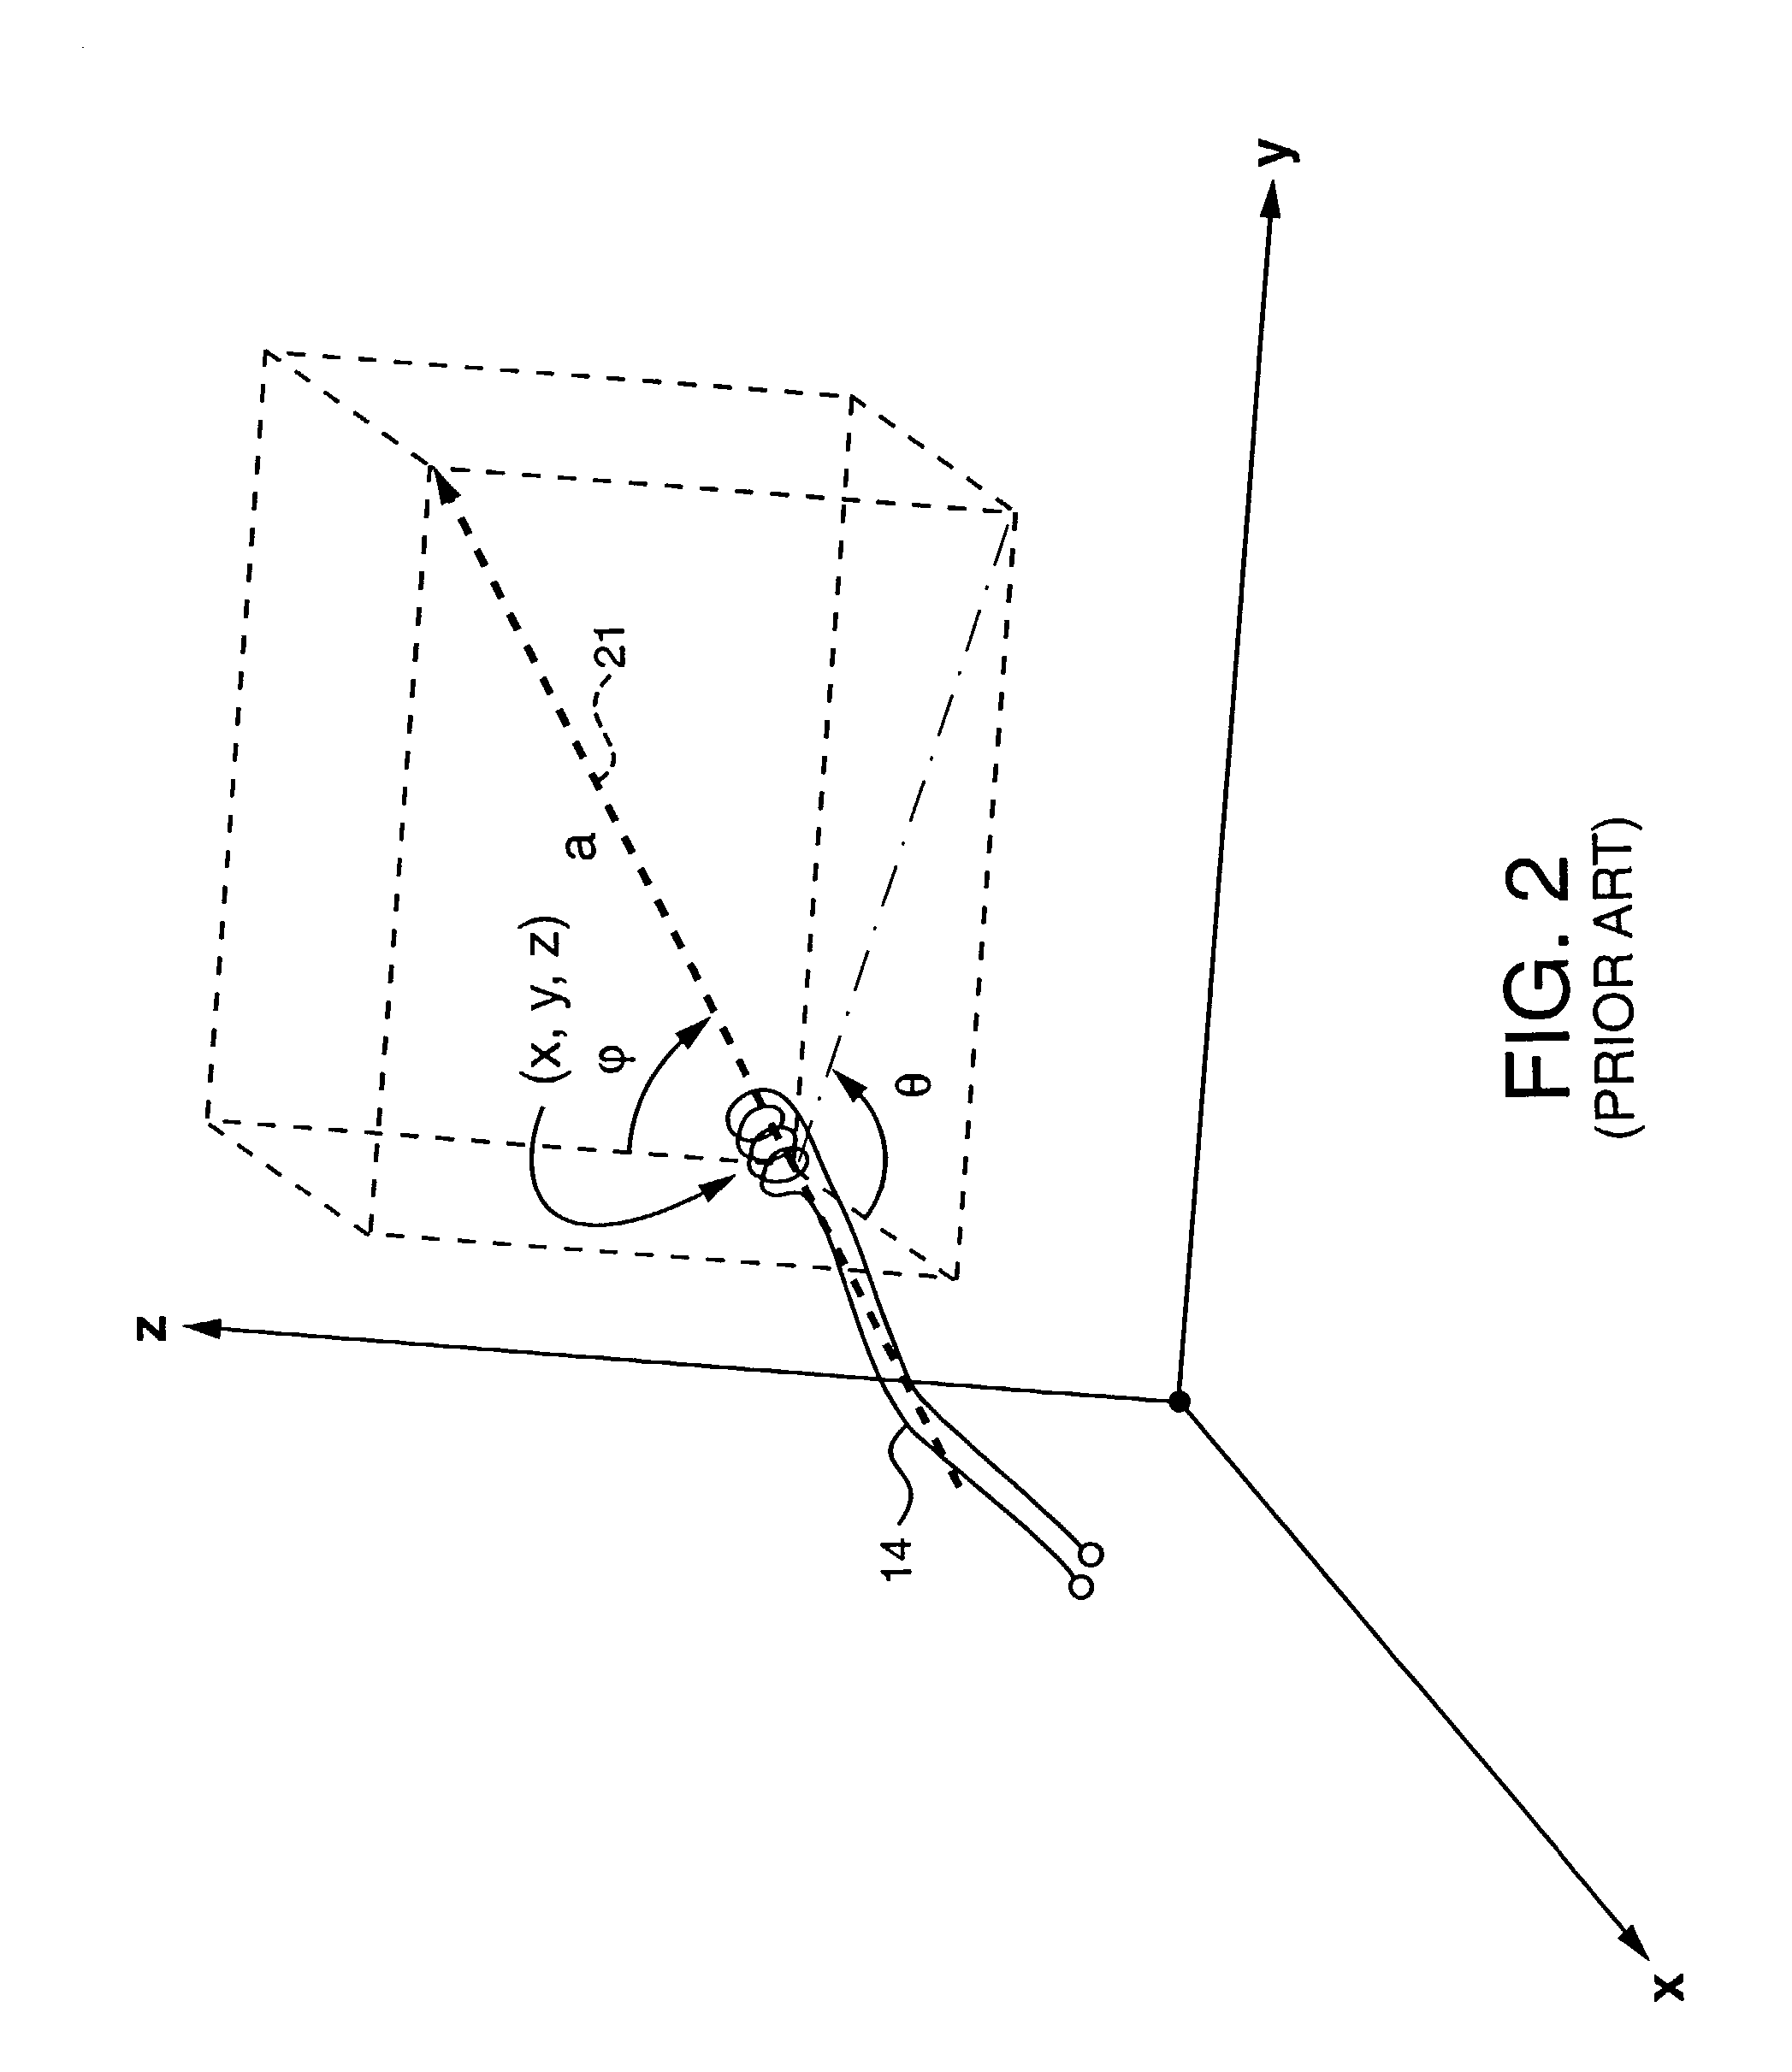 Method and system for navigating a catheter probe in the presence of field-influencing objects